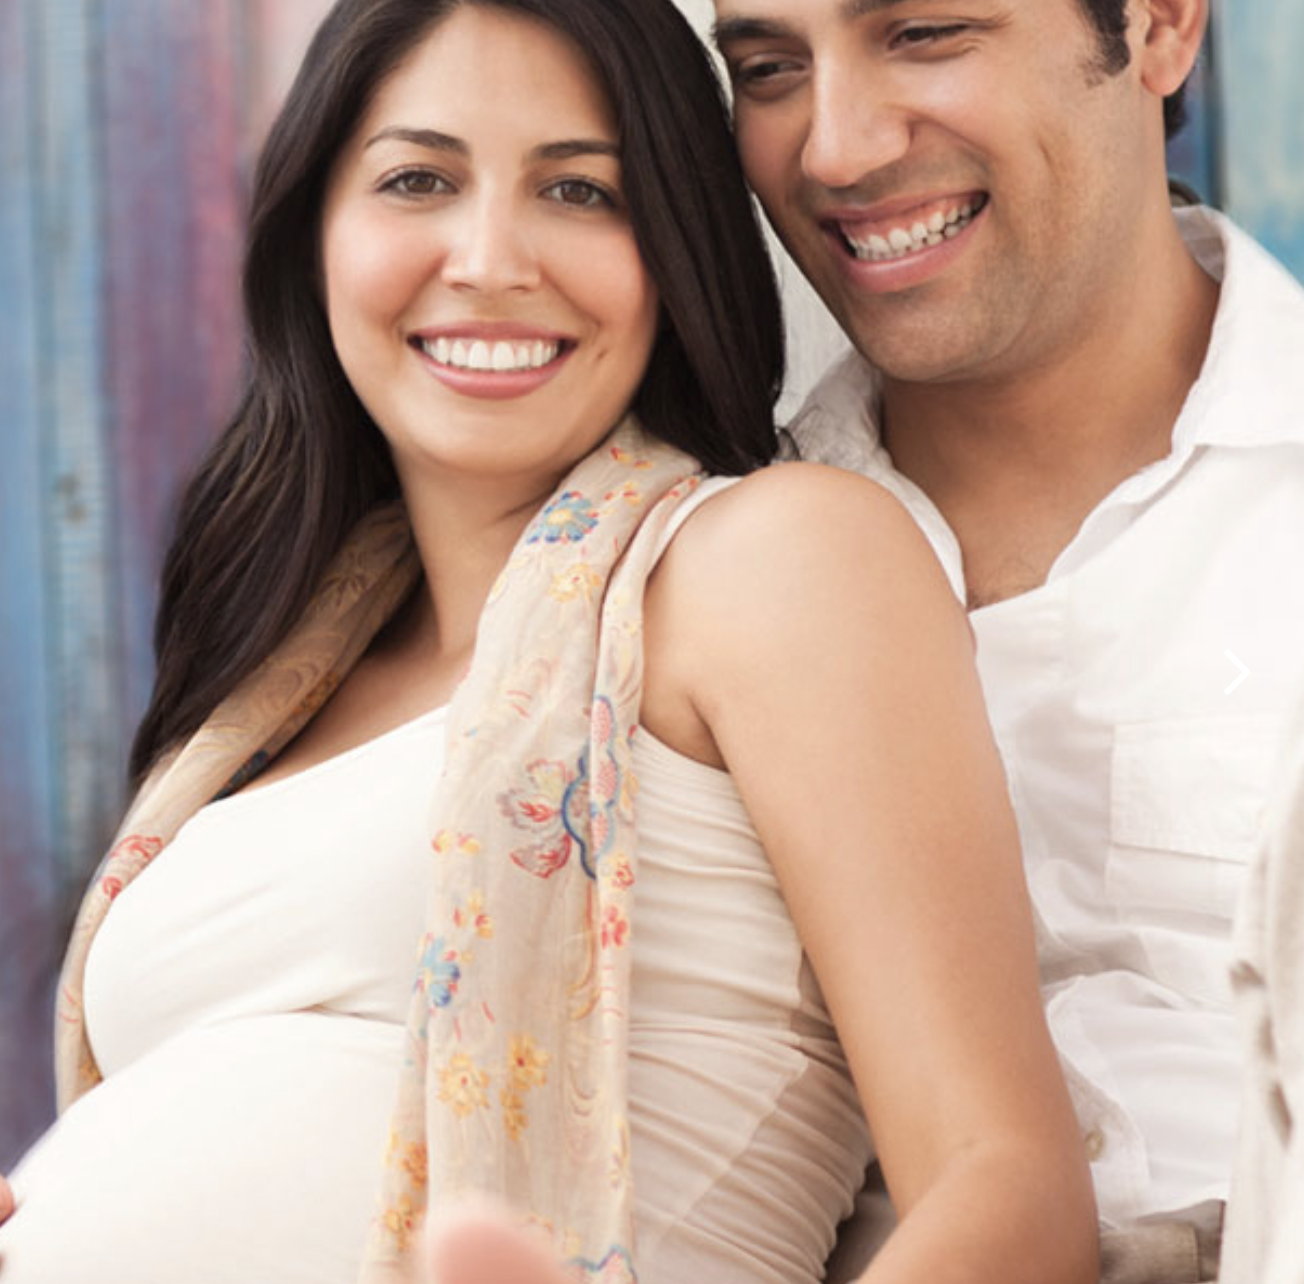 Pregnant Women With Partner | Birth You Desire